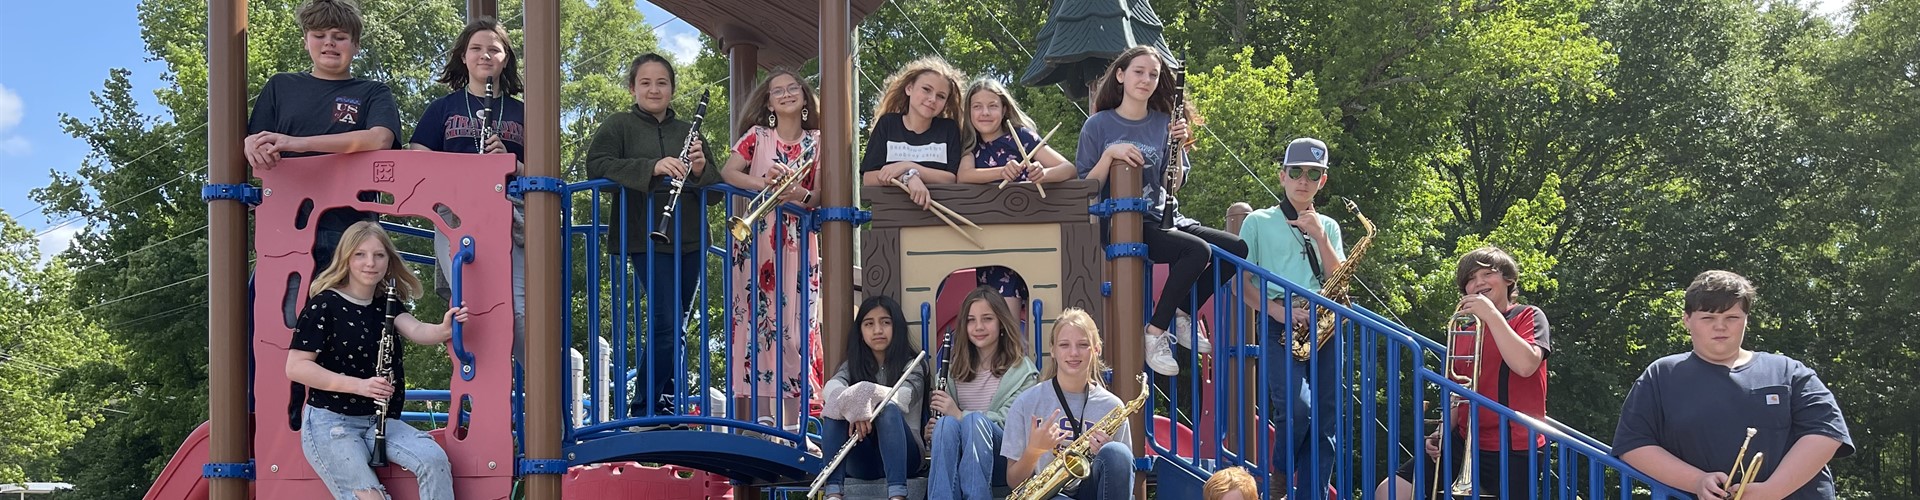 Students holding band instruments while standing on playground equipment